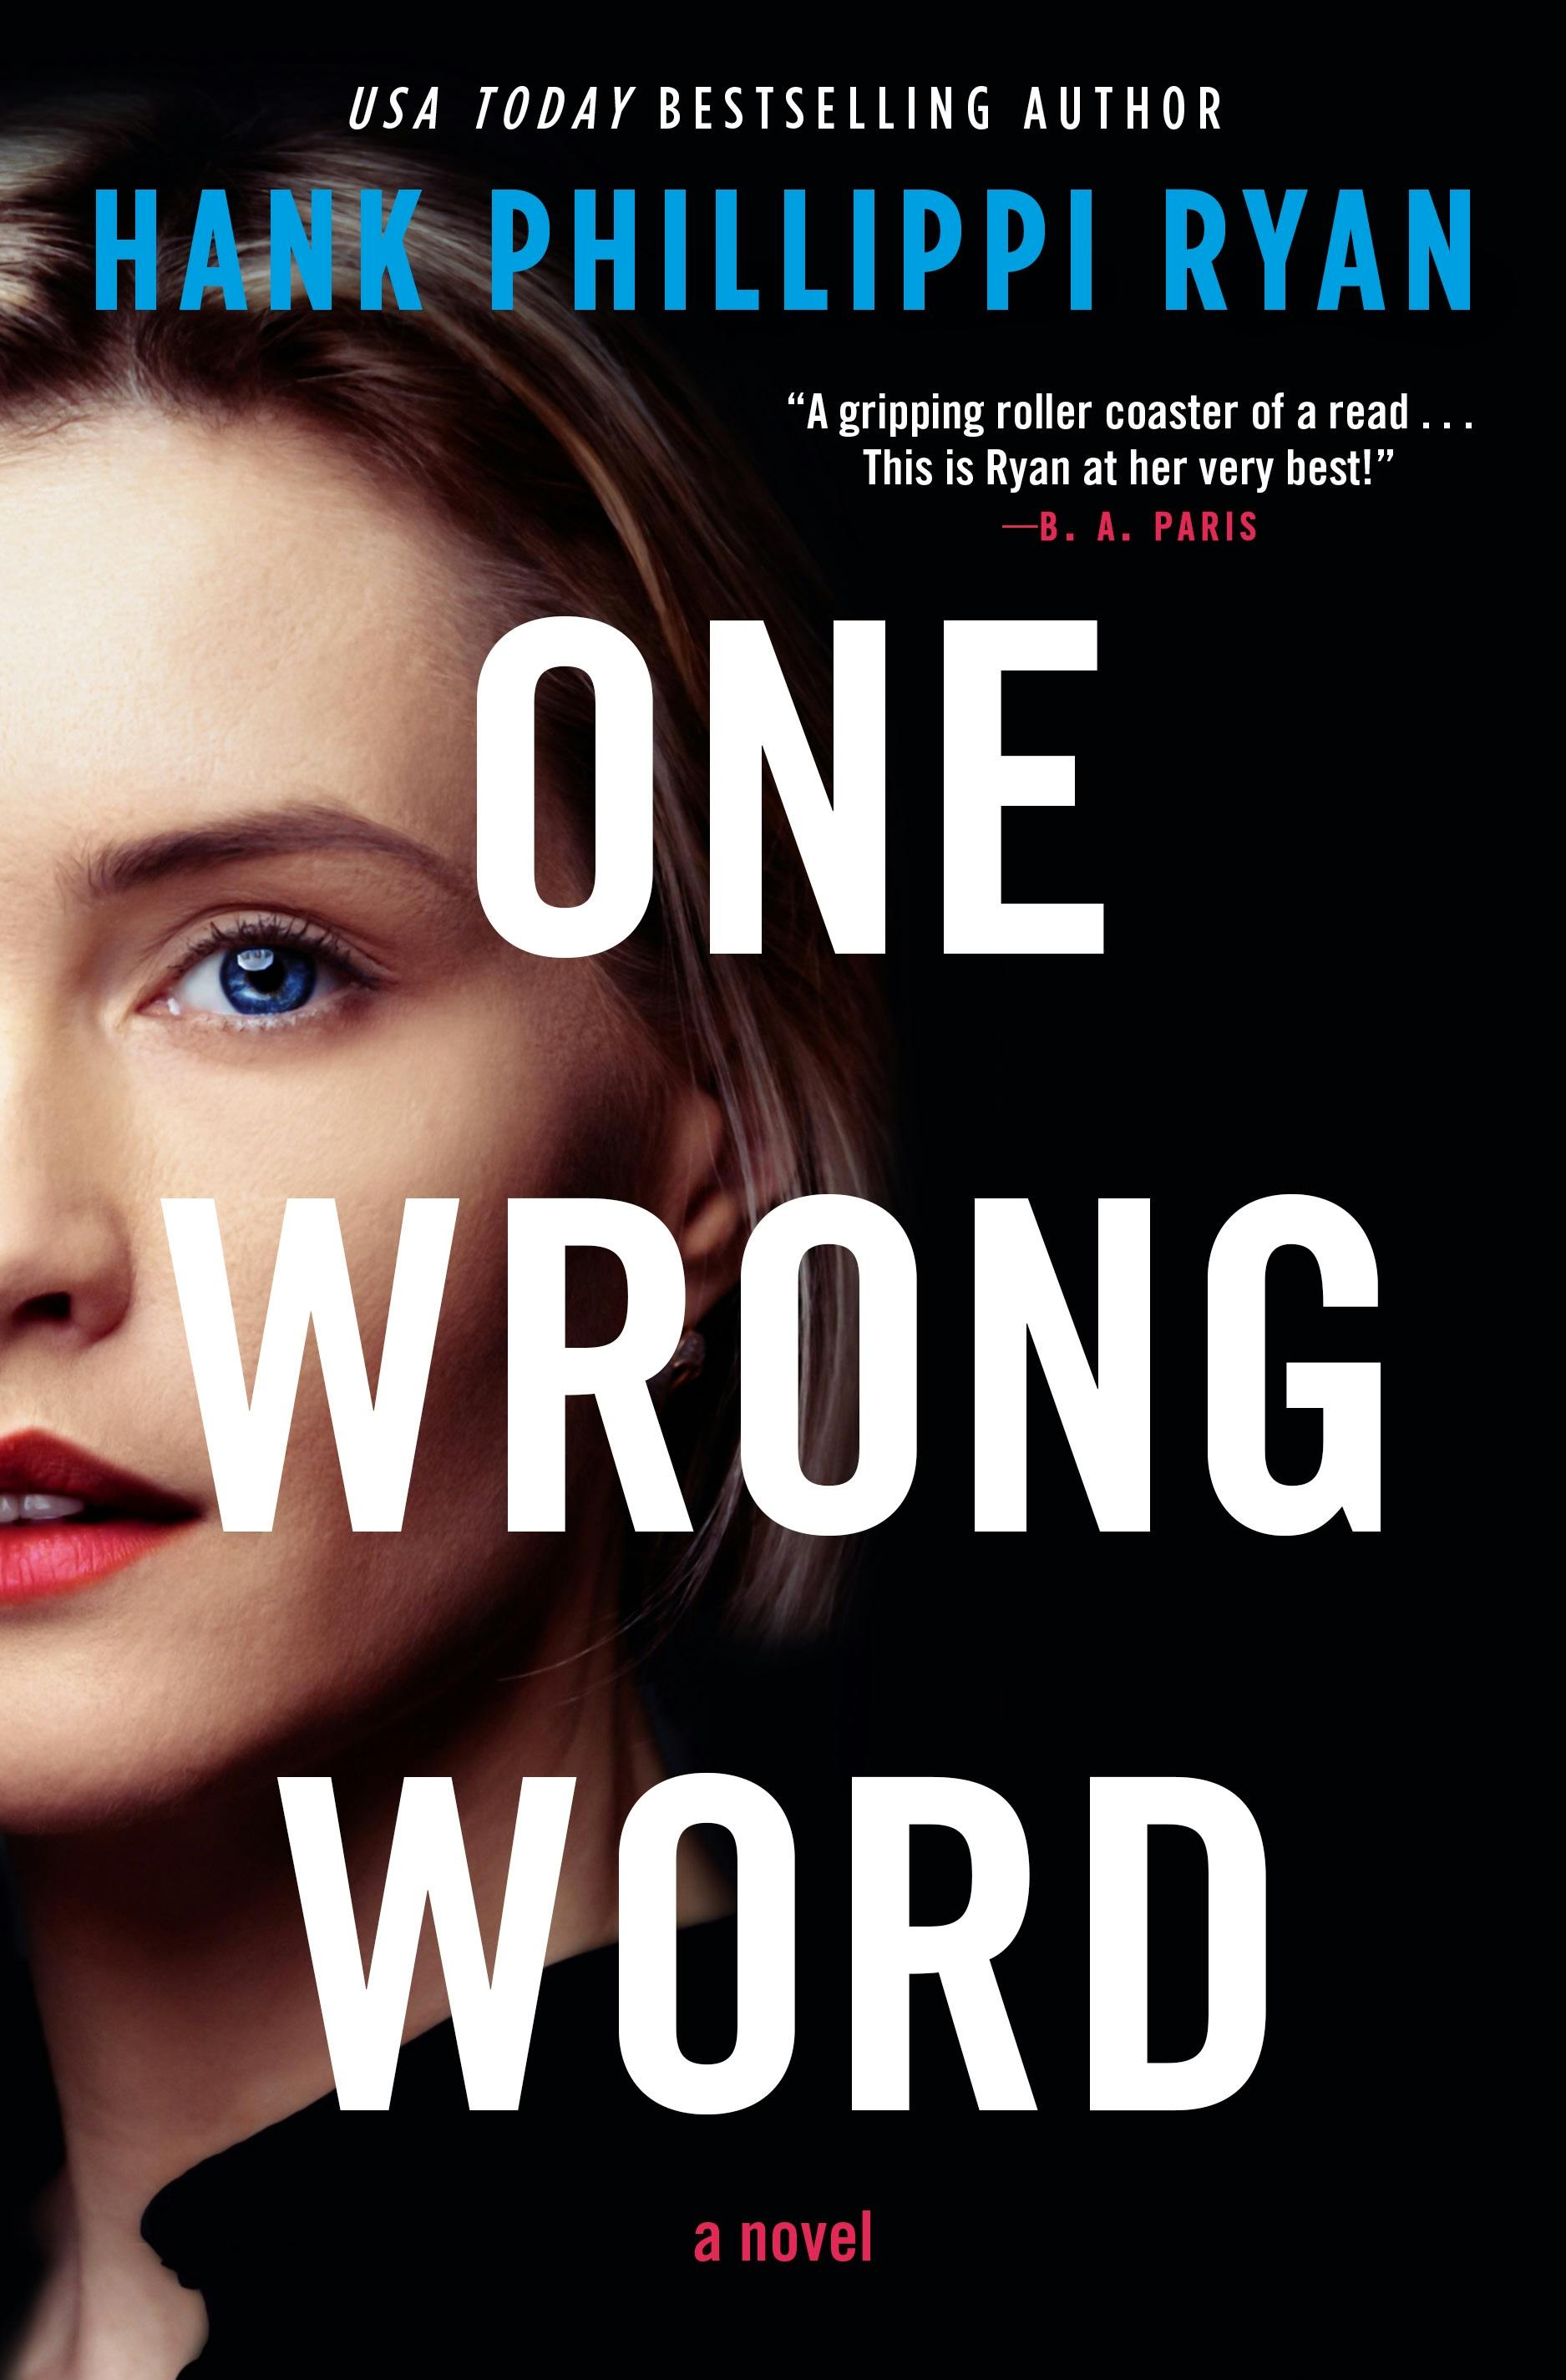 Cover for the book titled as: One Wrong Word